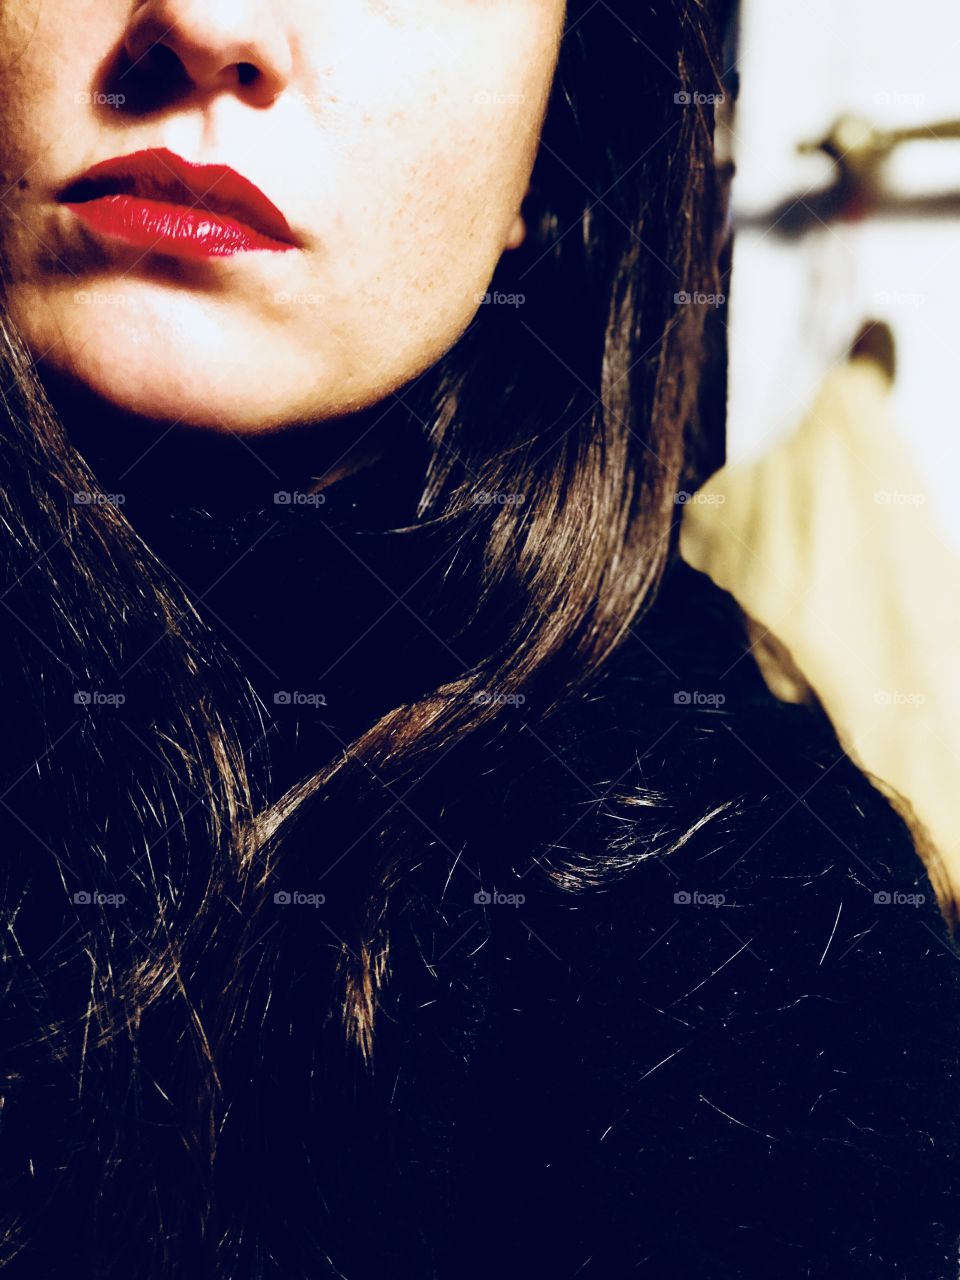 Woman mouth with a red lipstick